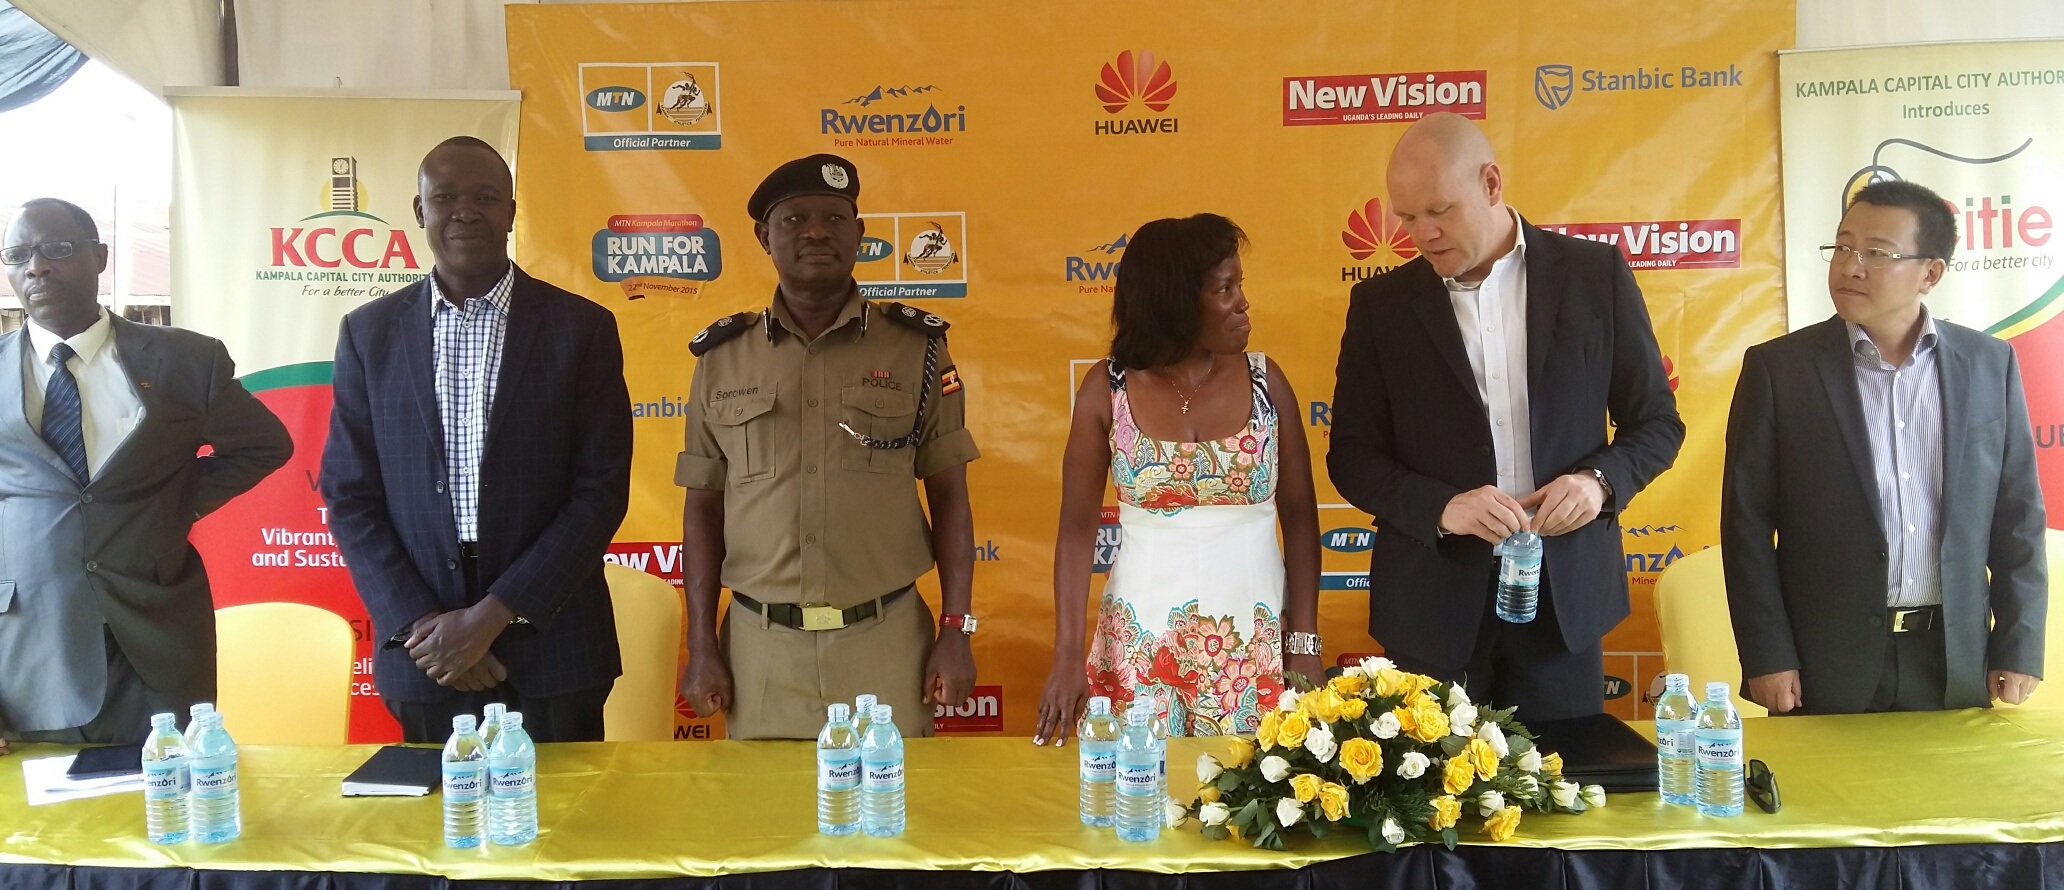 MTN CEO Brian Gouldie shakes hands with the KCCA ED Jennifer Musisi after the launch of MTN Kampala Marathon 2015 edition. This was at Nsambya Police Primary school on 27th October 2015. Other officials looking on include Marathon partner representatives from Huawei, Stanbic Bank, Rwenzori Mineral water, Uganda athletic Federation and MTN officials.